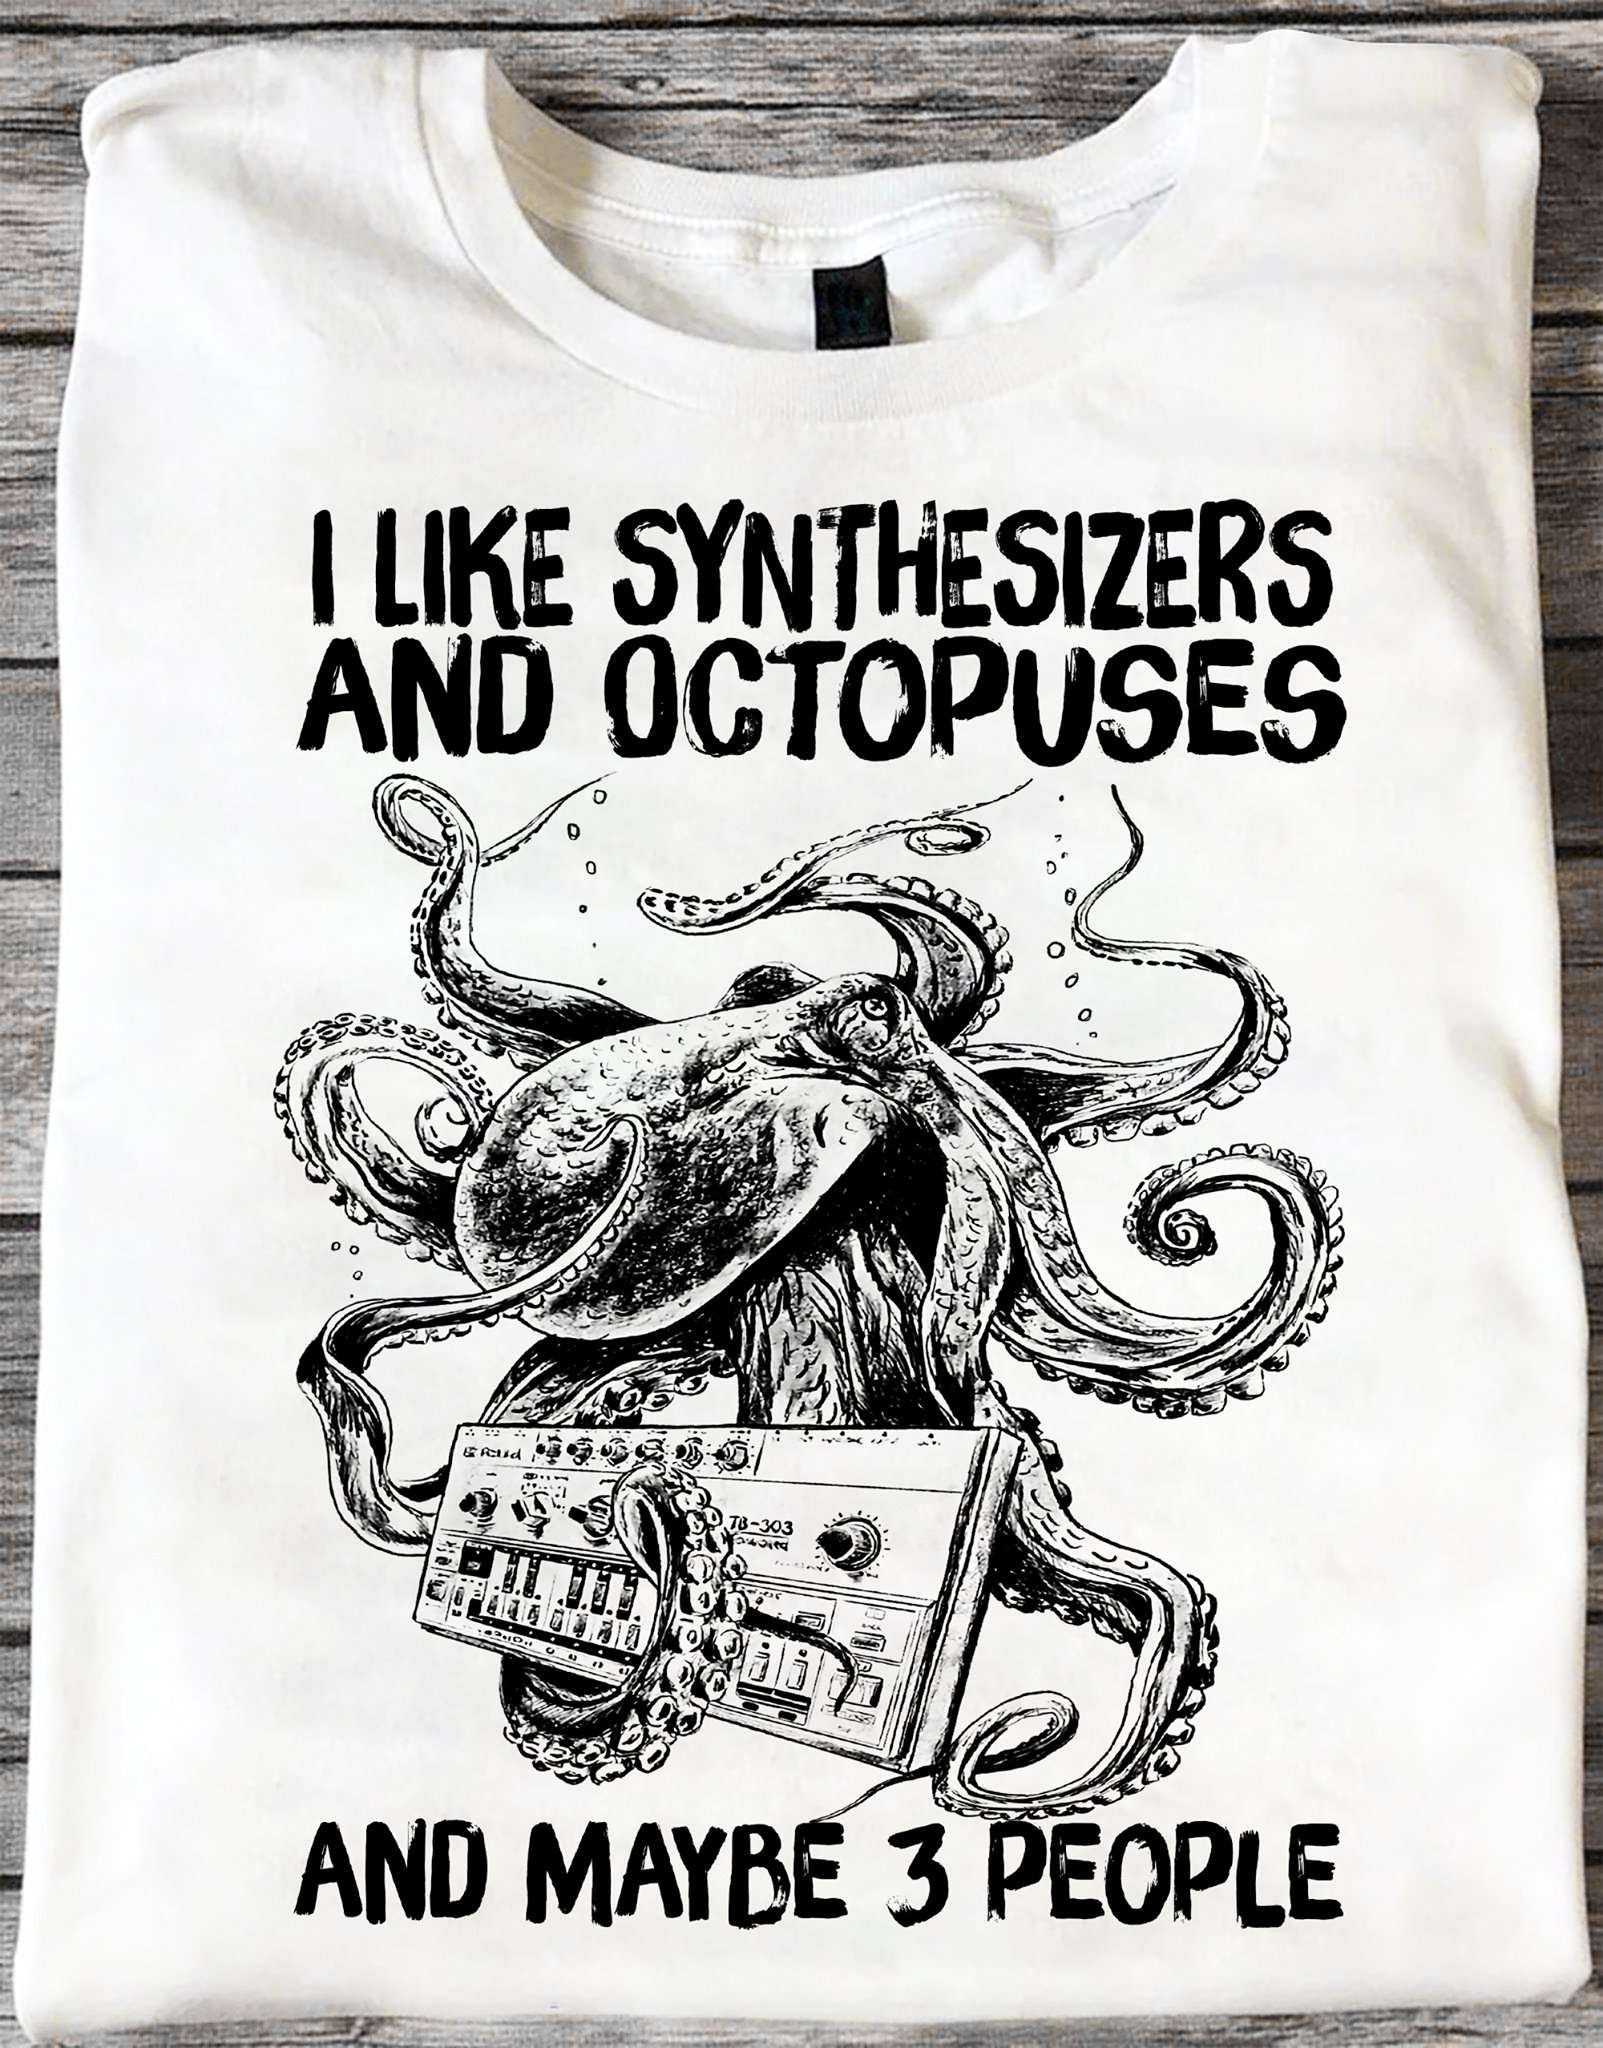 I like synthesizers and octopuses and maybe 3 people